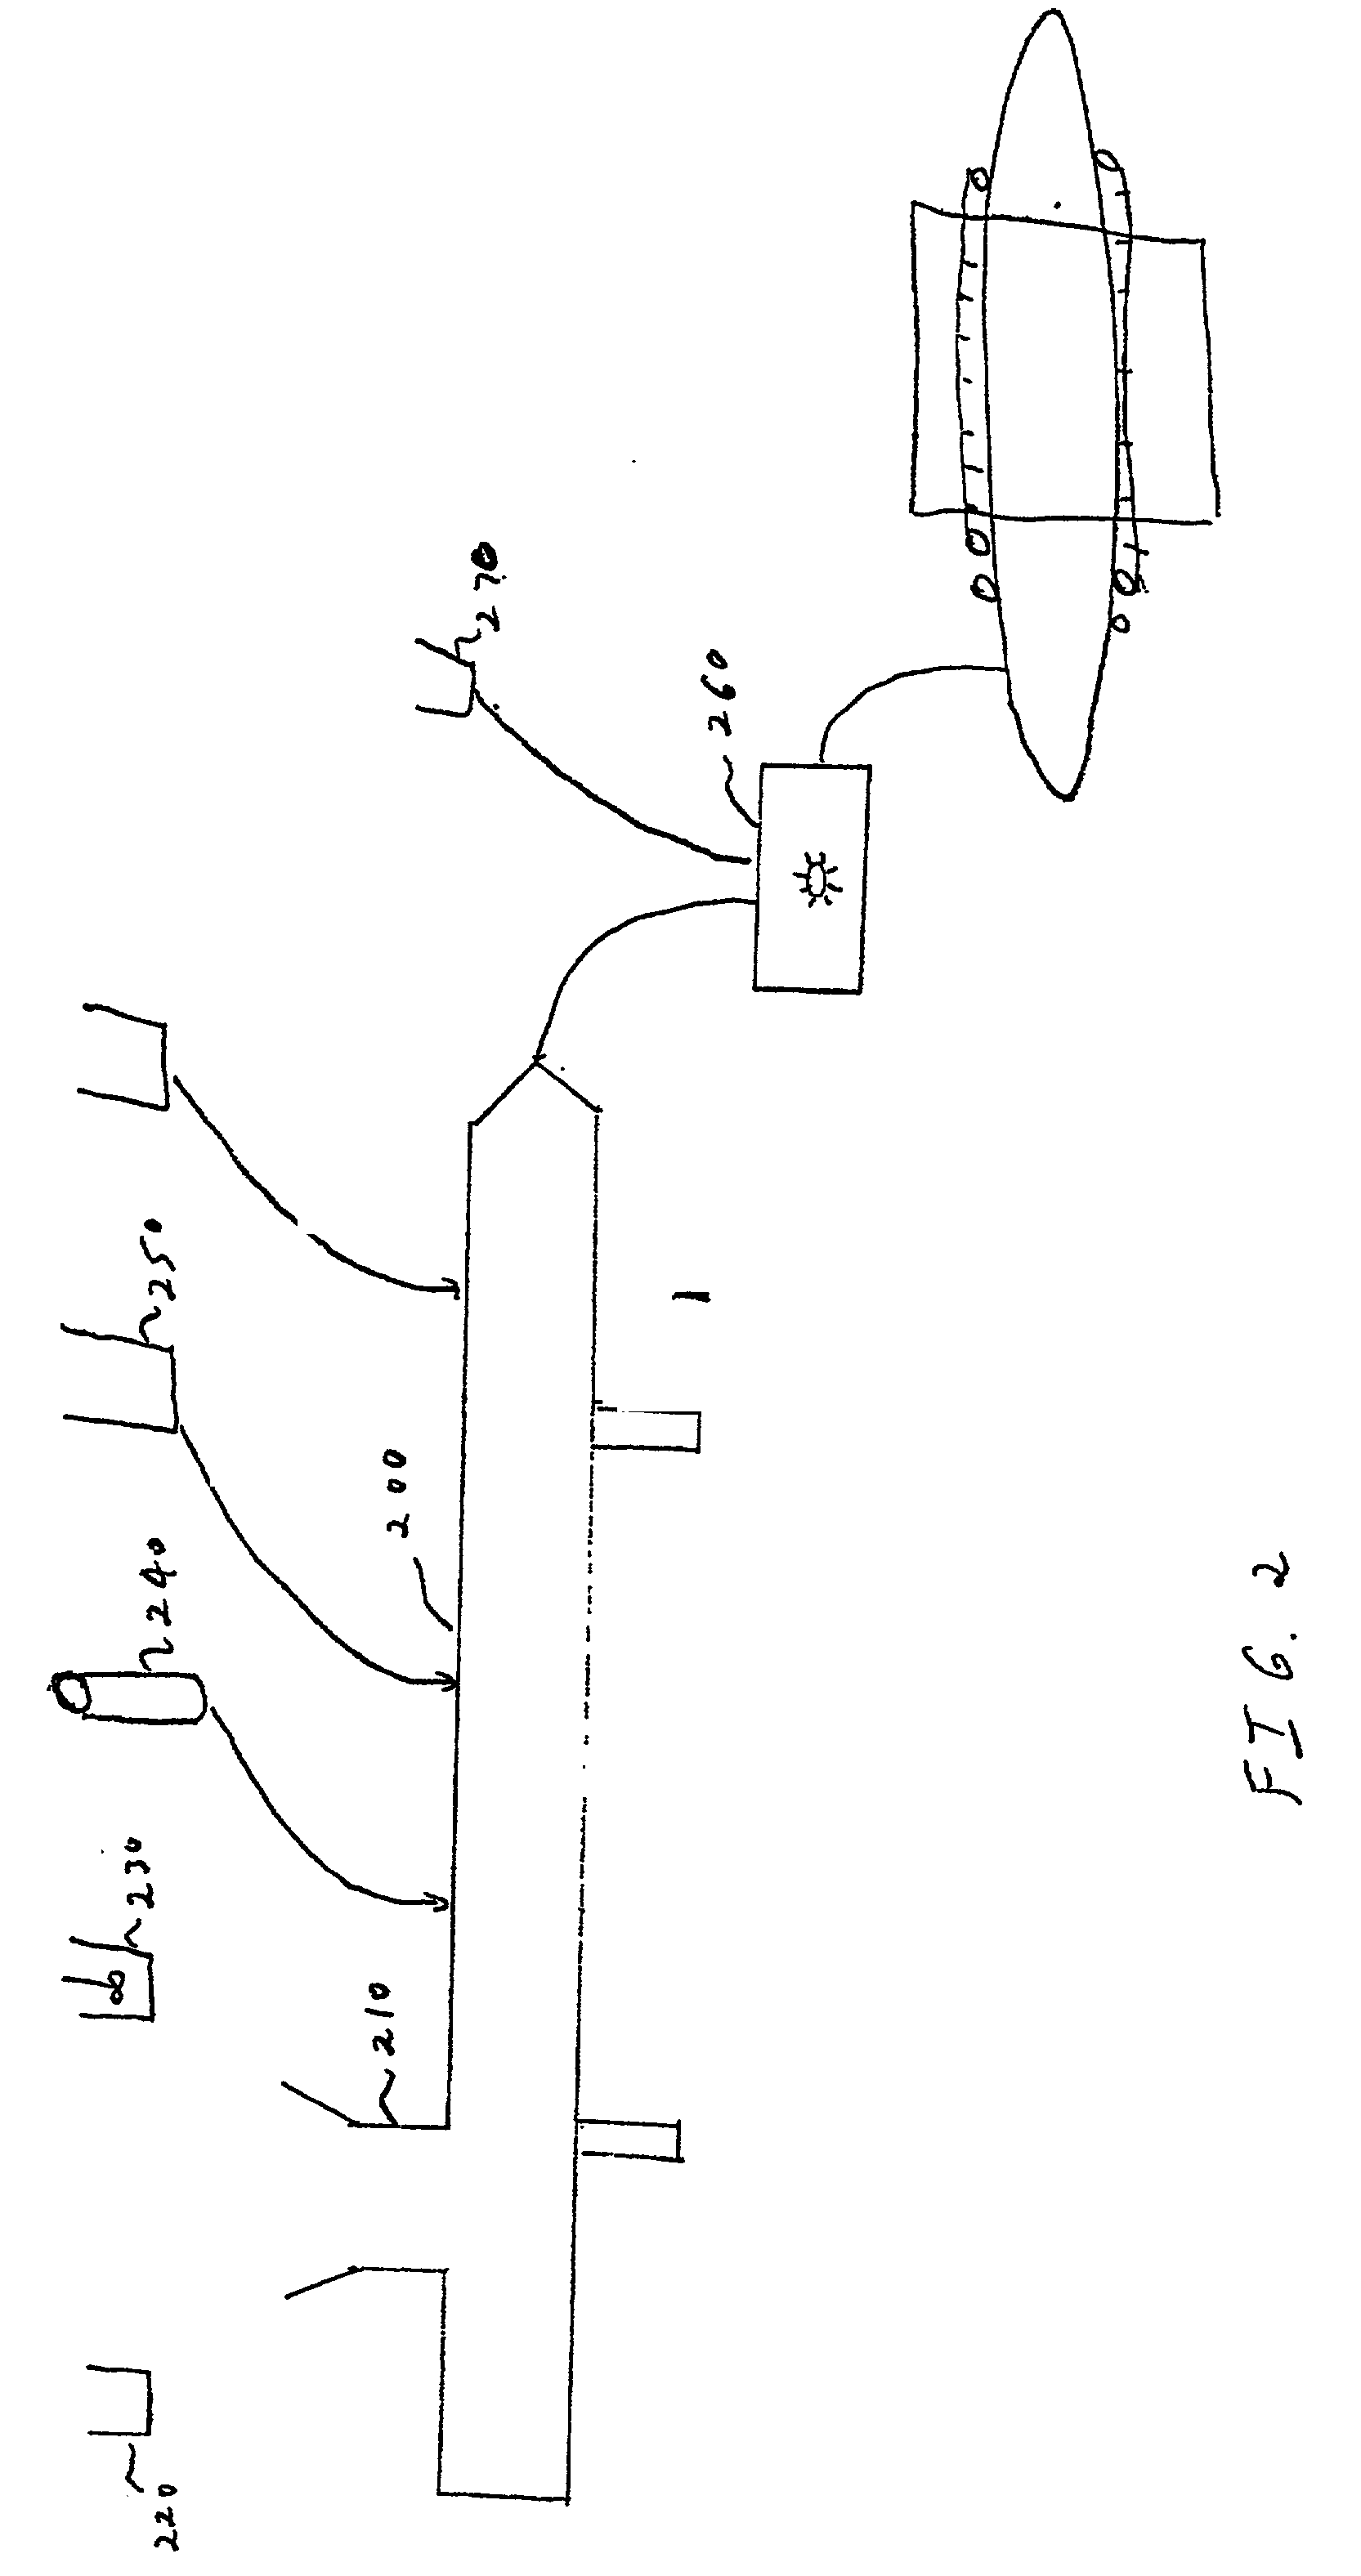 Process and apparatus for making a thermoset foam